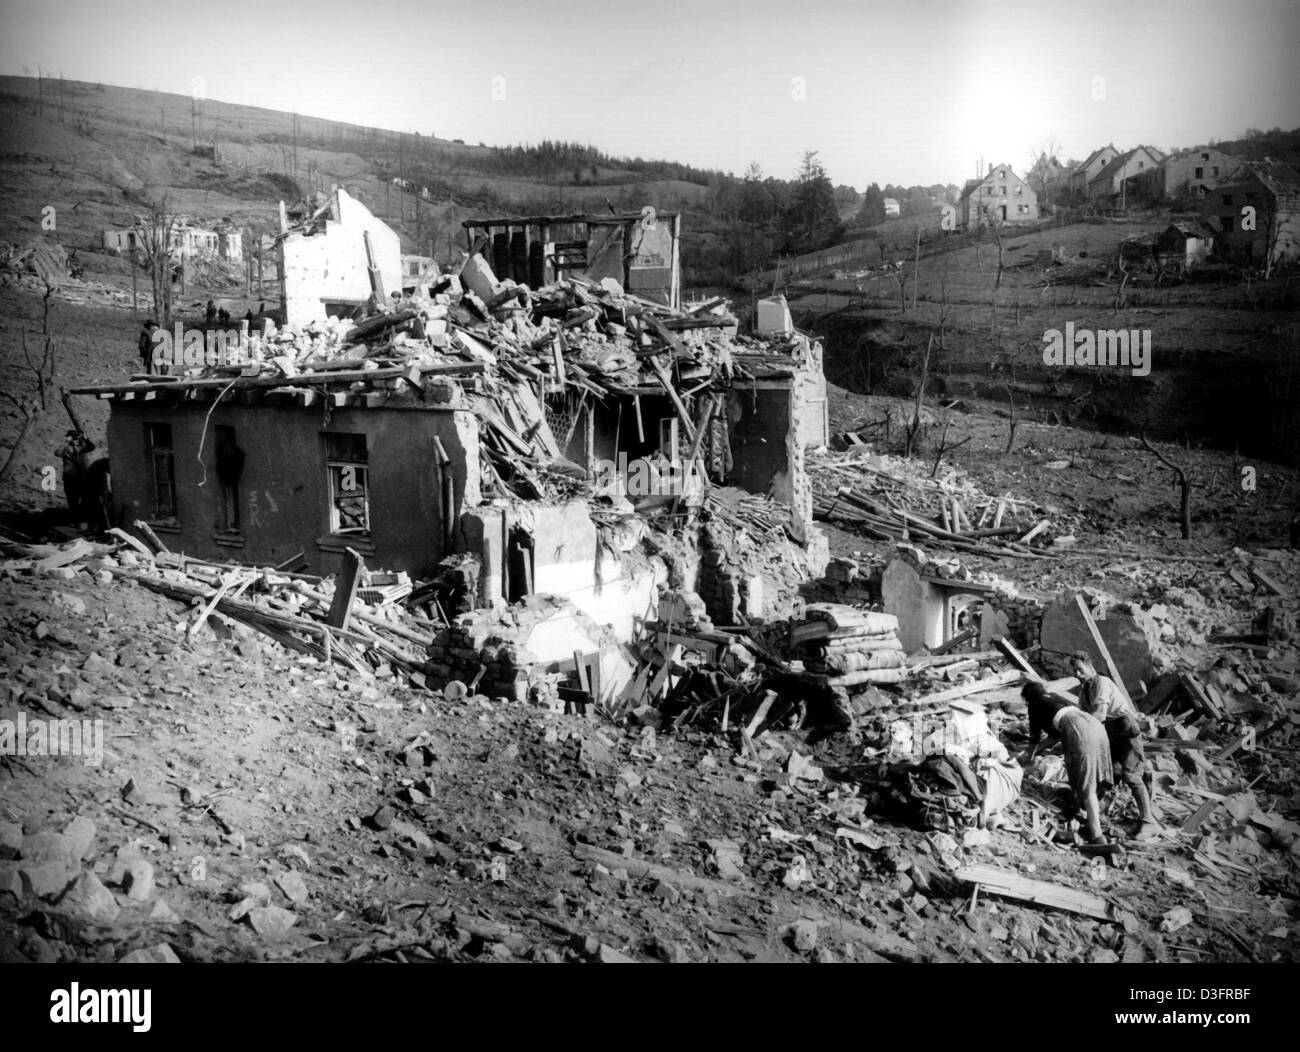 (dpa files) - Inhabitants search for usable household items in the destroyed houses in Pruem, post-war Germany, 15 August 1949. On 15 August 1949 more than 500 tons of ammunition, remnants of the German army in World War II, exploded in a subterranean bunker near Pruem. Large parts of the town of Pruem were destroyed. 11 people died and around 150 people were seriously injured. Stock Photo